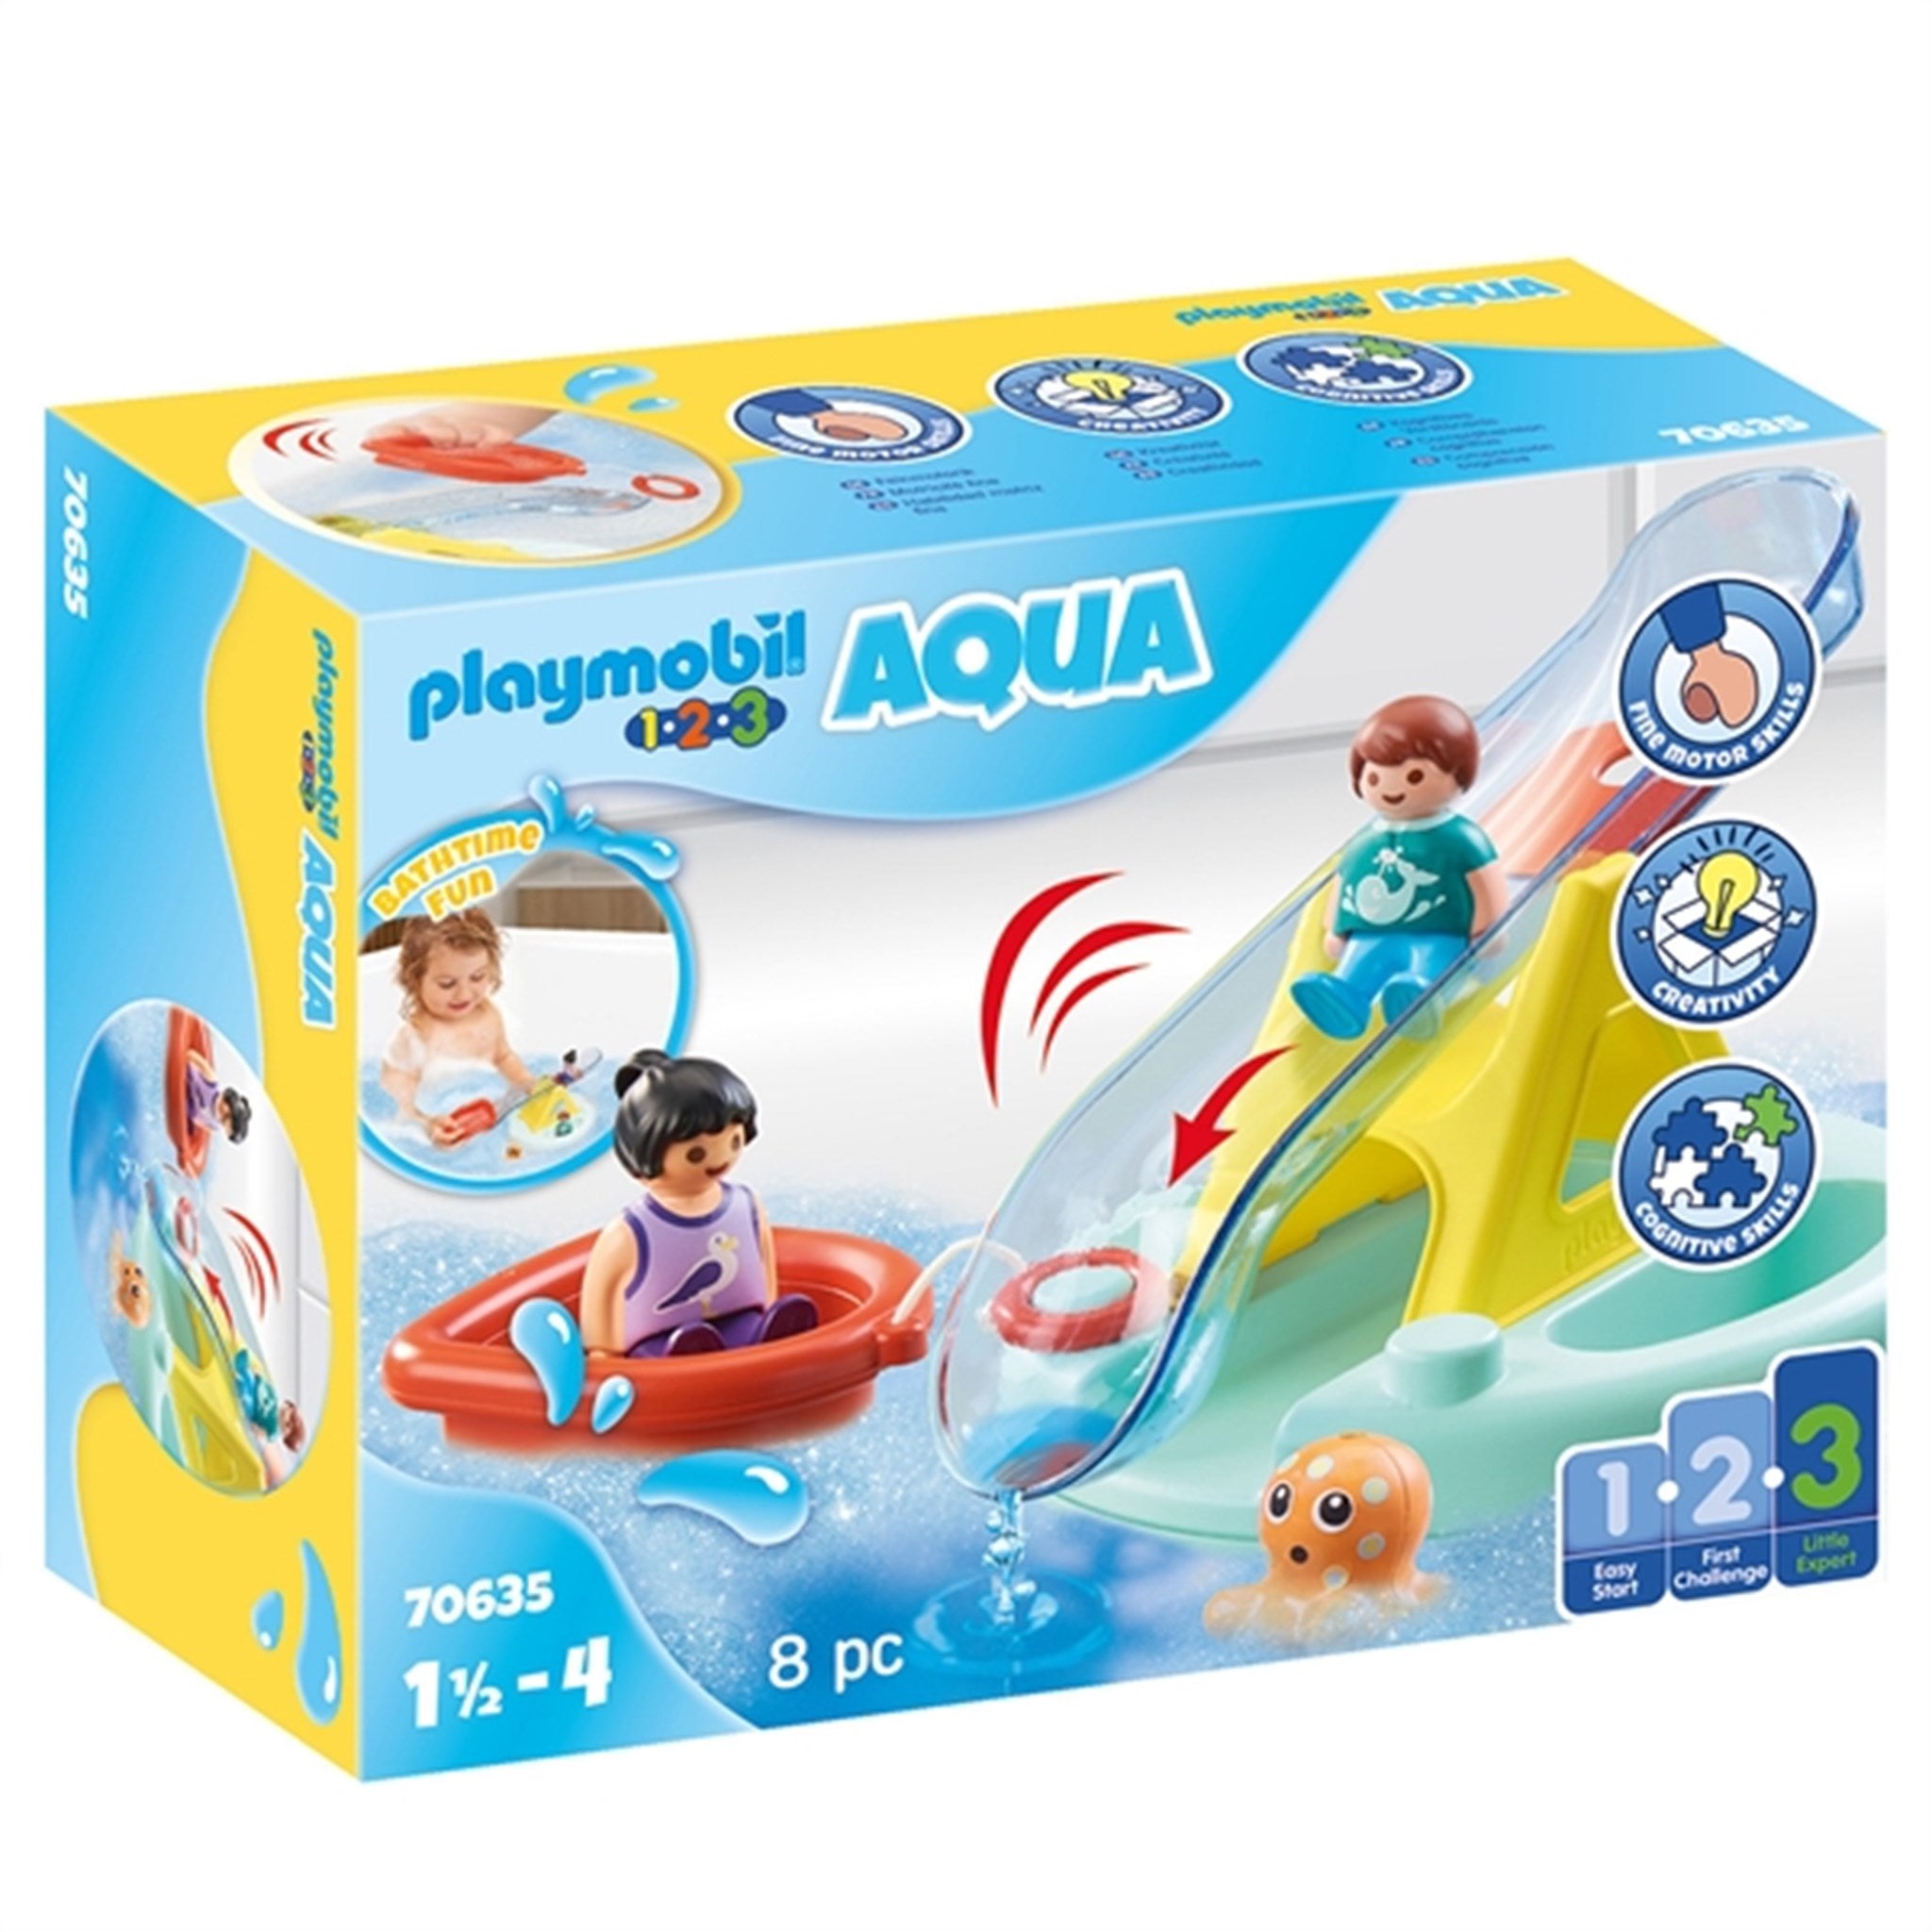 Playmobil® 1.2.3 Aqua - Water Seesaw with Boat